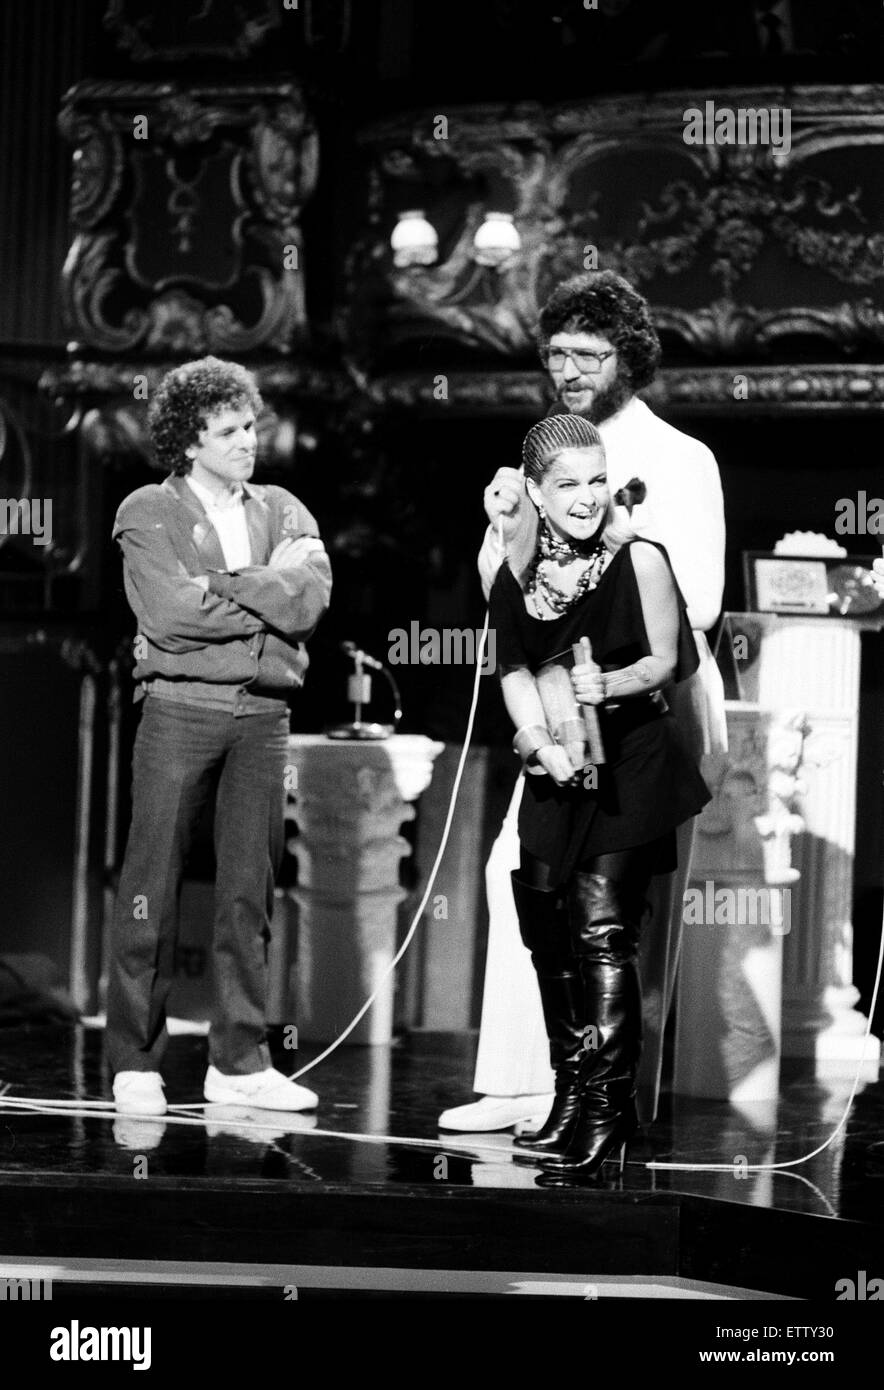 Daily Mirror British Rock & Pop Awards at The Lyceum, London. Toyah Willcox receiving 'Best Female Singer of 1981' award. Pictured on stage with Leo Sayer and Dave Lee Travis. 23rd February 1982. Stock Photo